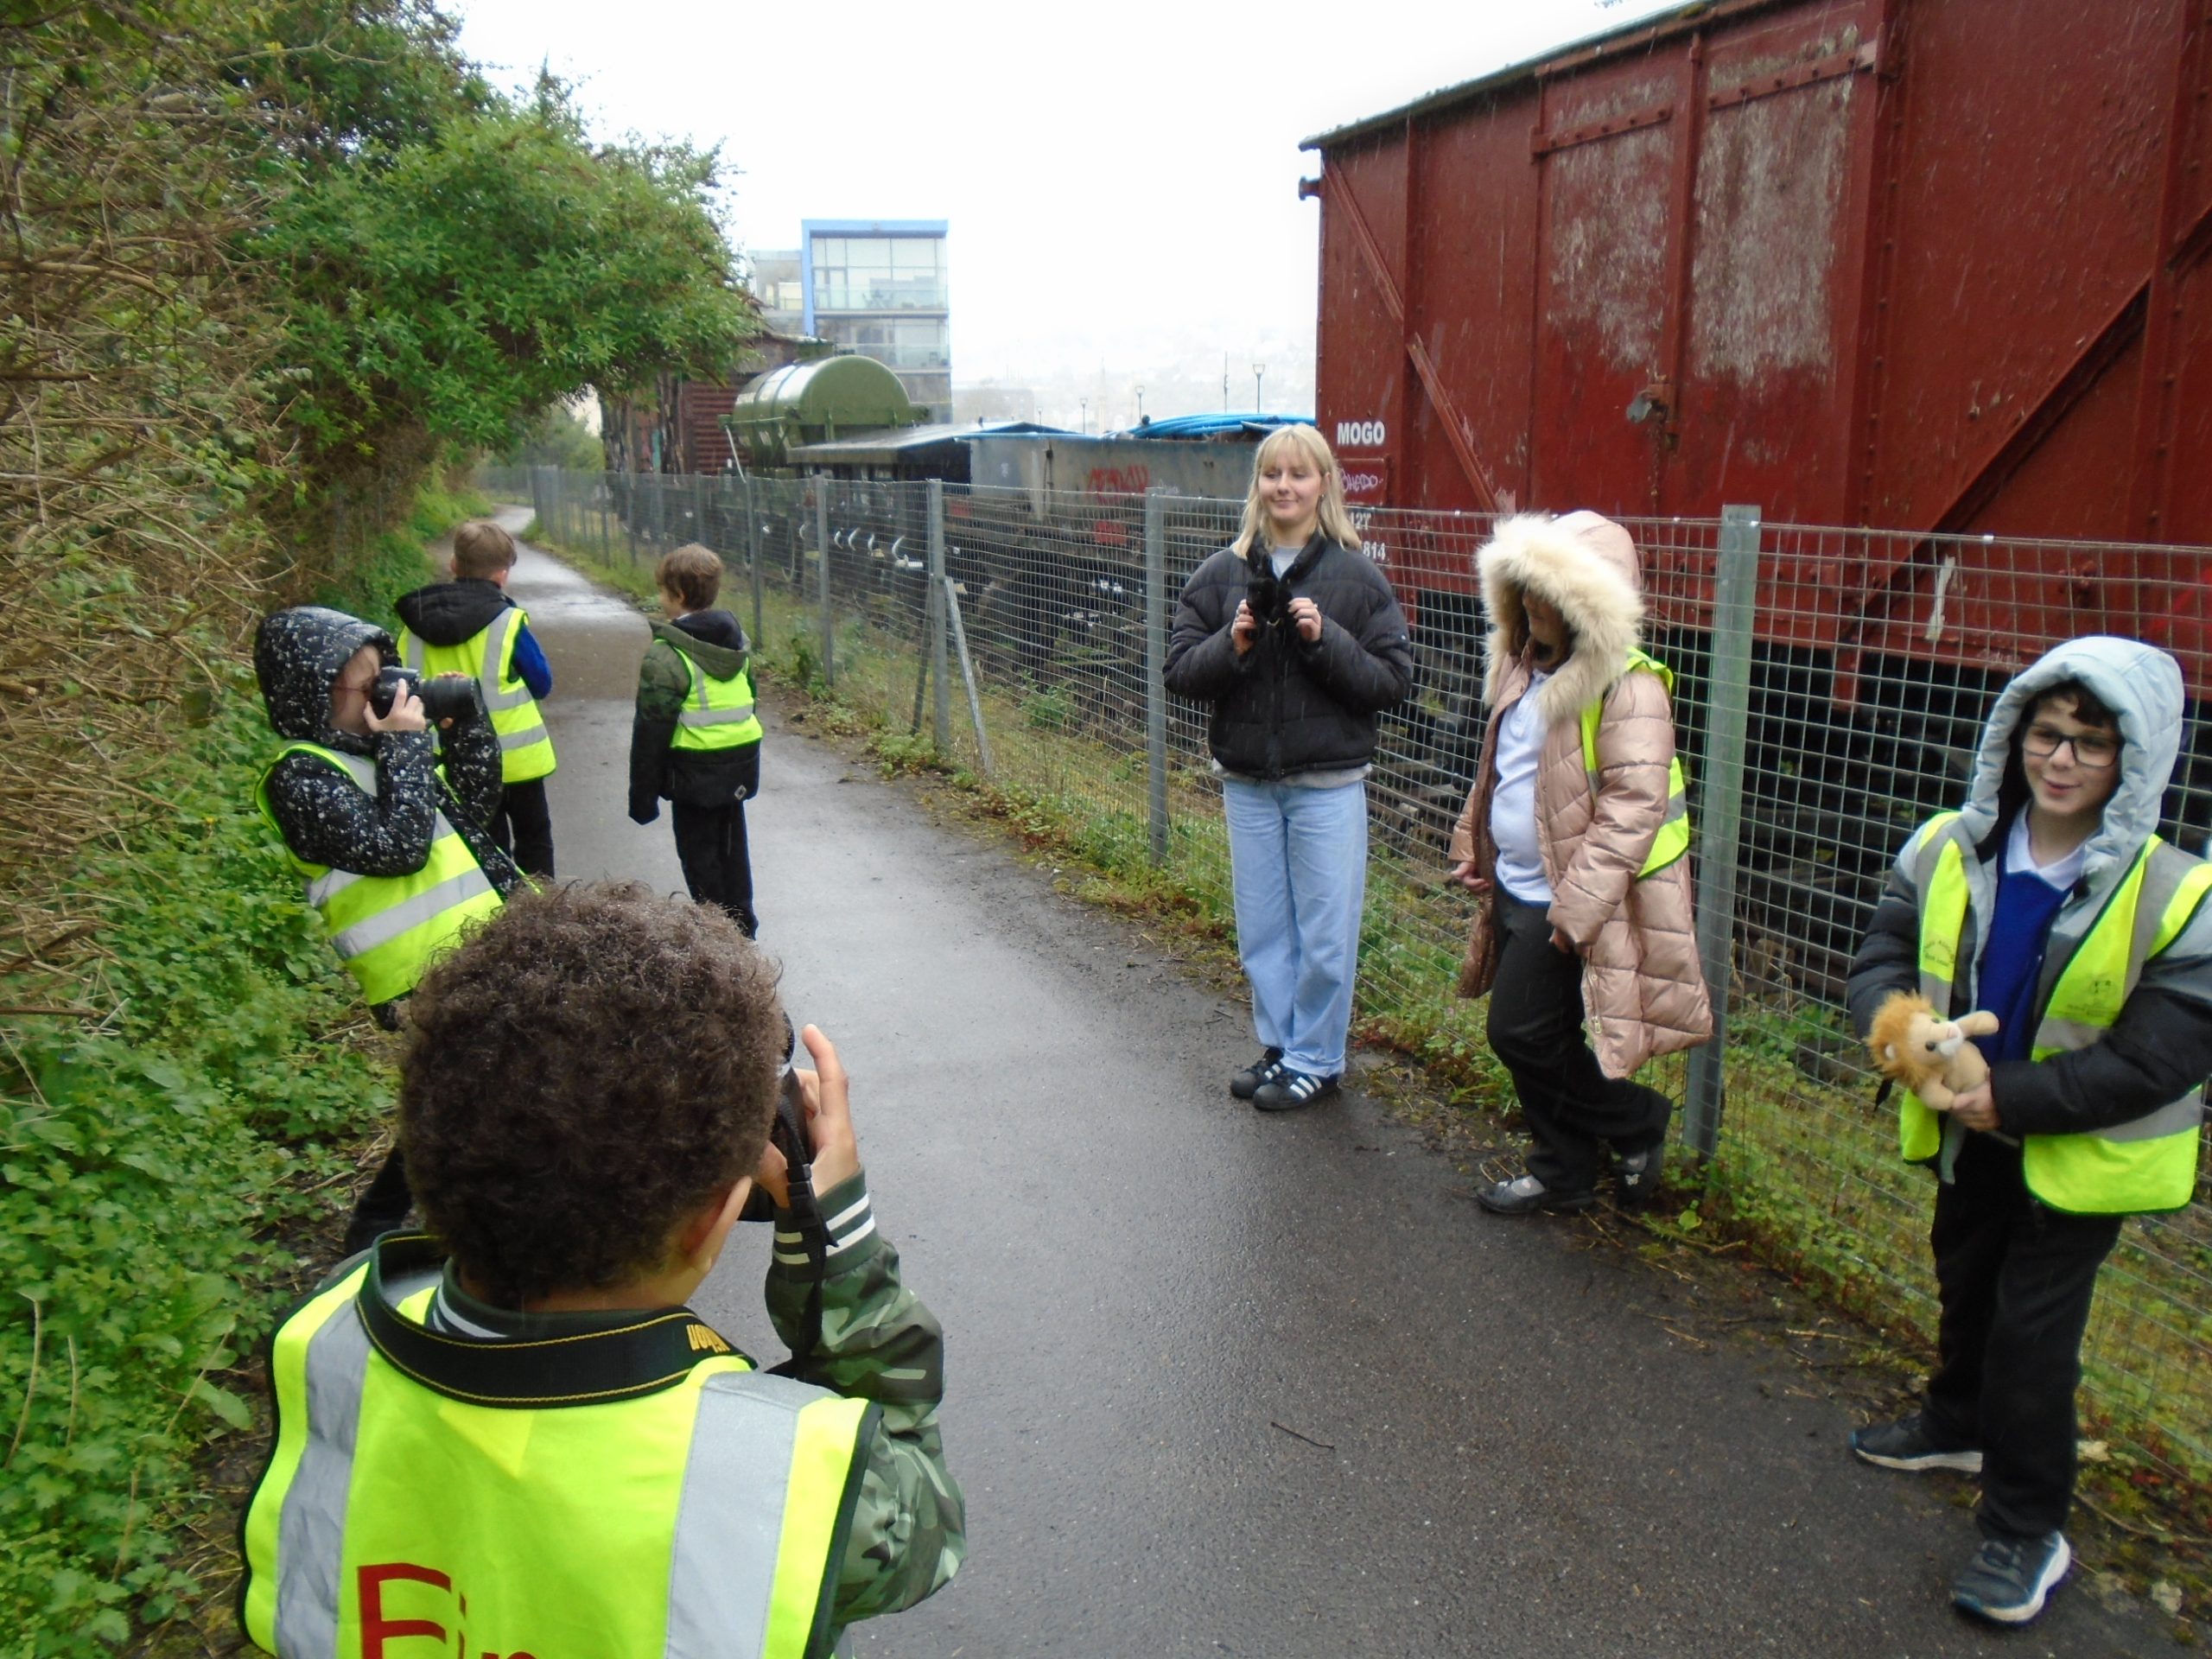 Primary school children taking photos on Bristol harbourside with professional cameras. Railway sidings in background